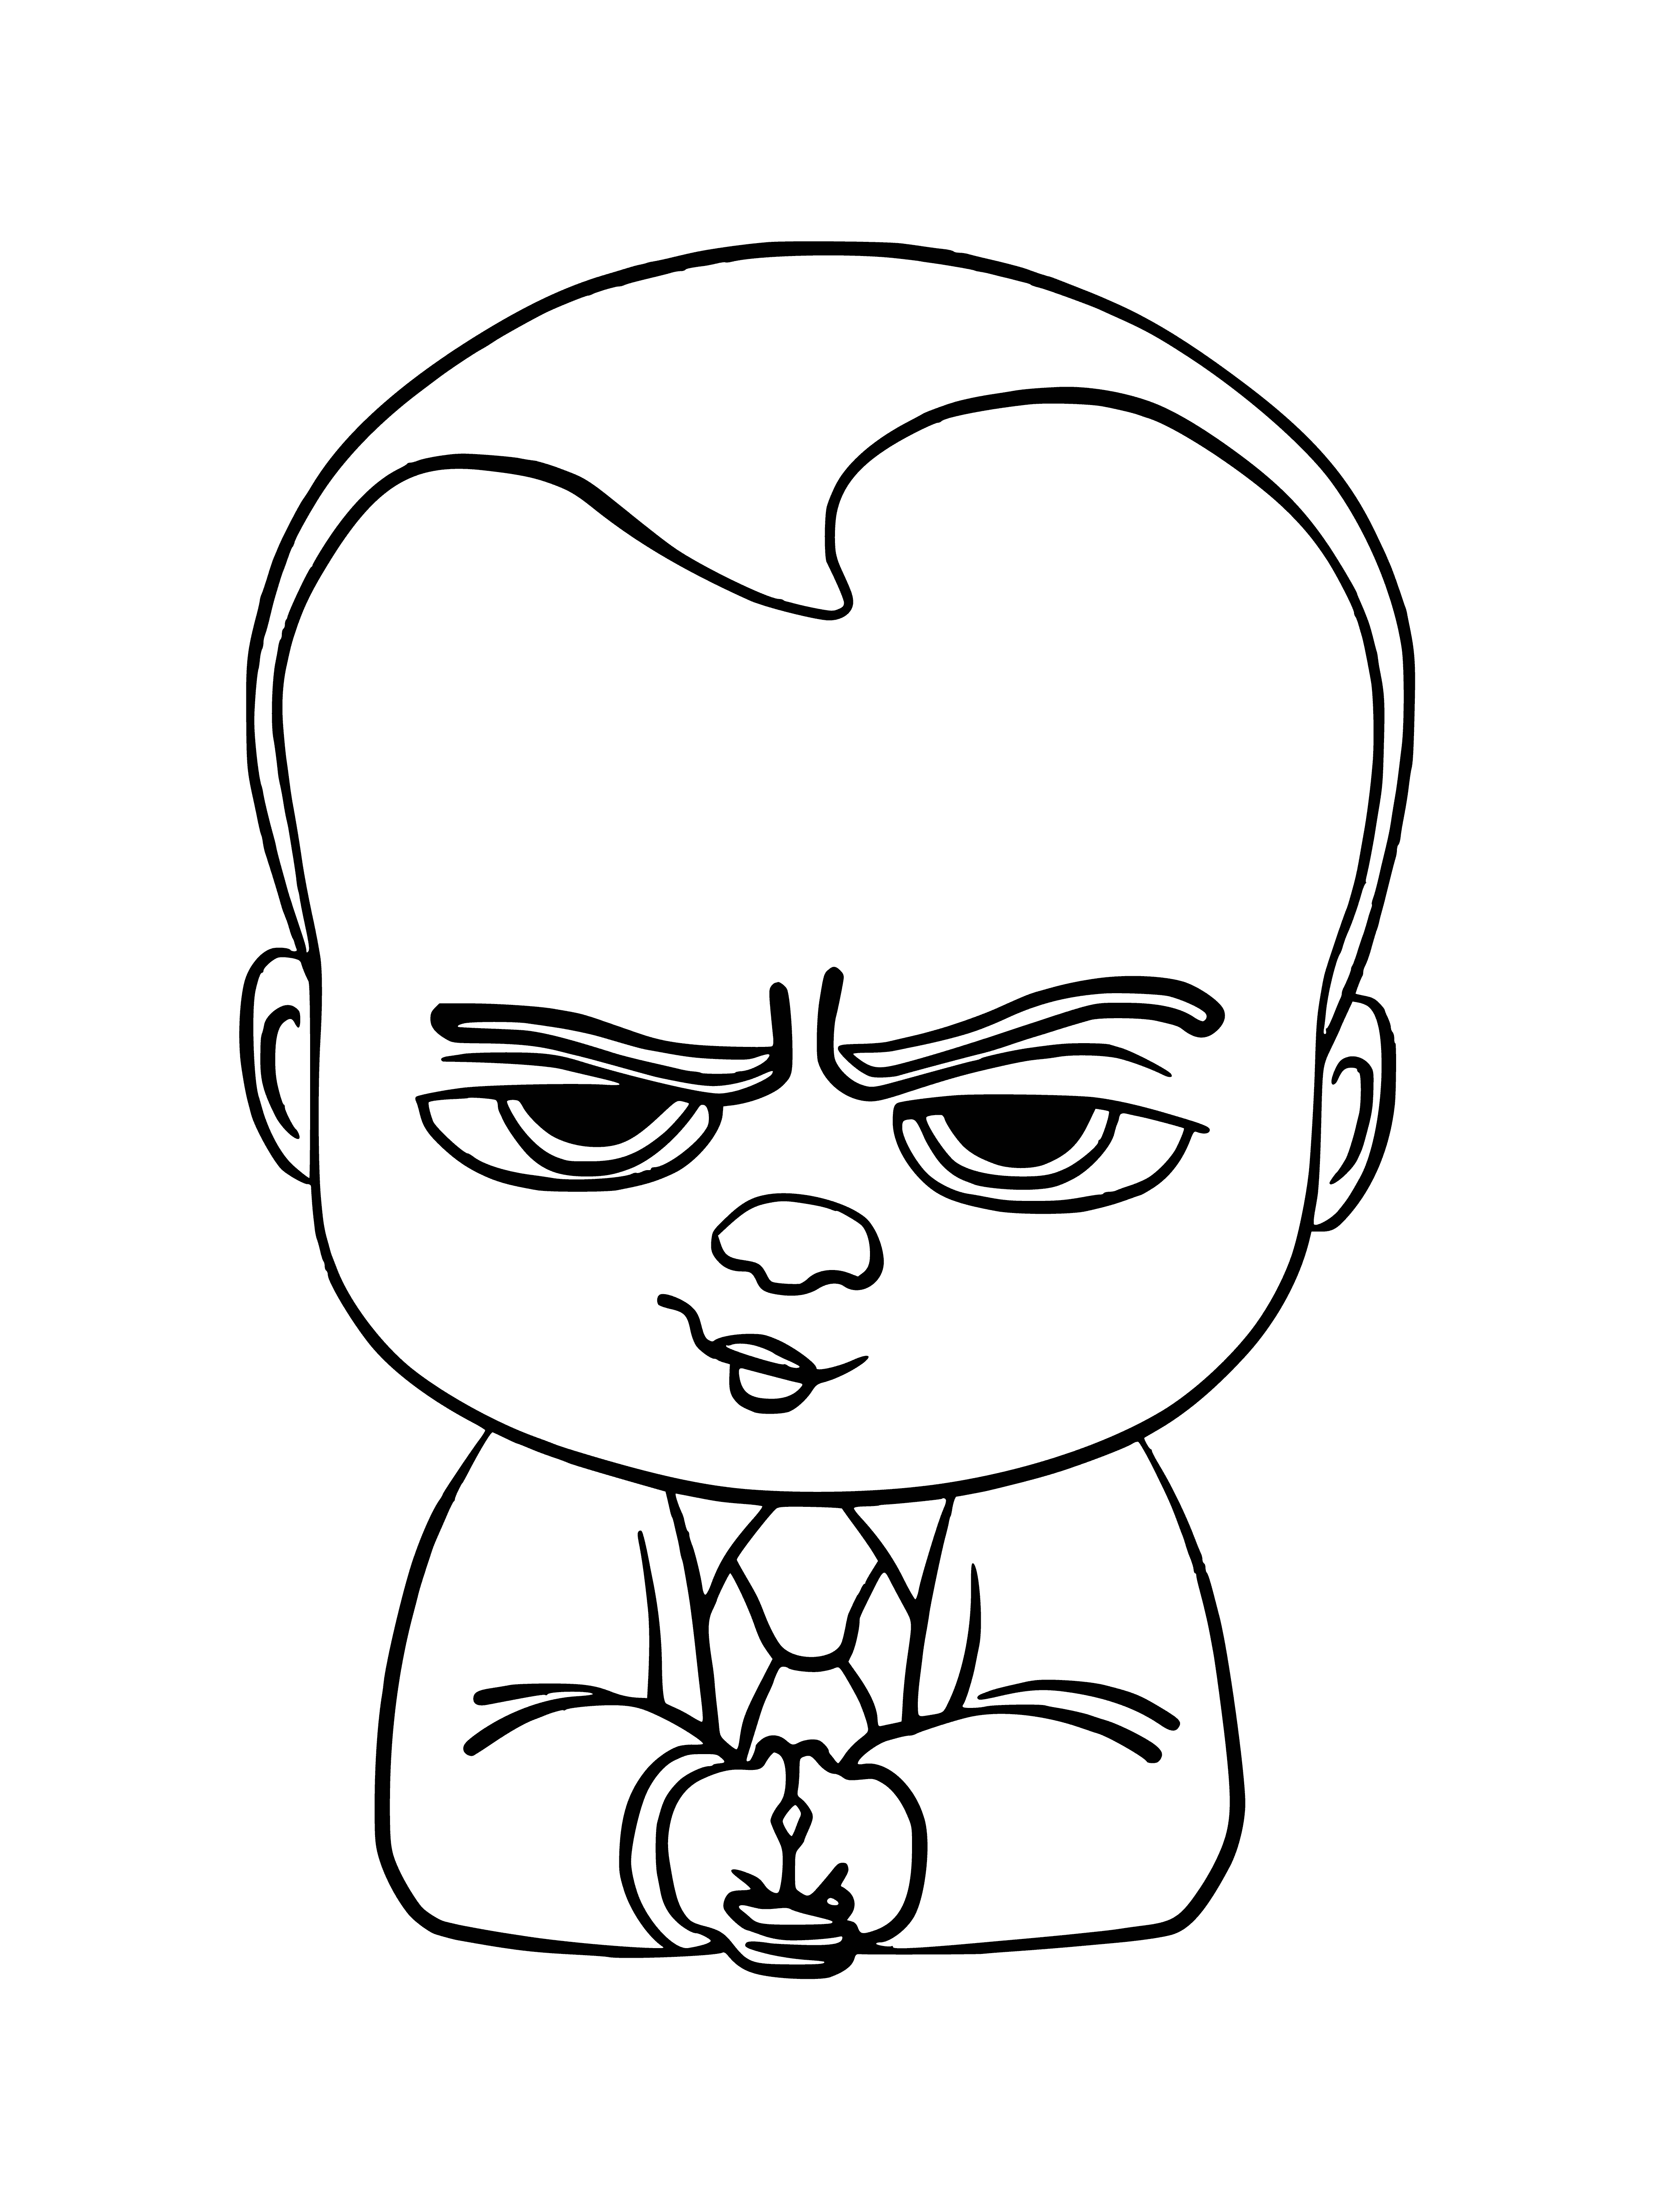 coloring page: A determined baby in a grey suit w/white shirt & black tie holds a toy phone up to its ear.